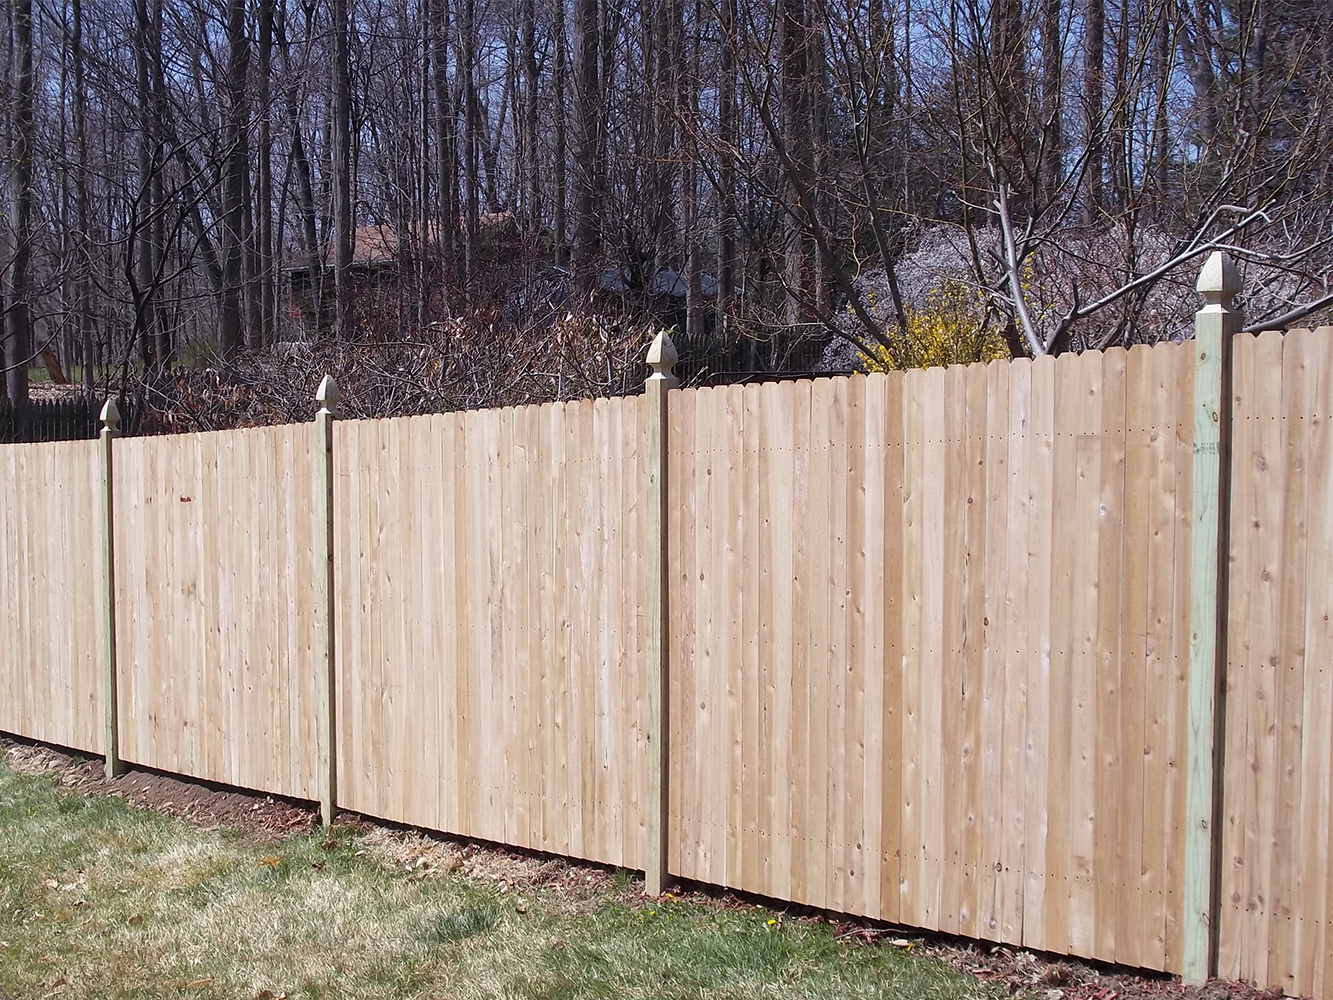 Photo of a wood fence from a fencing contractor in New York